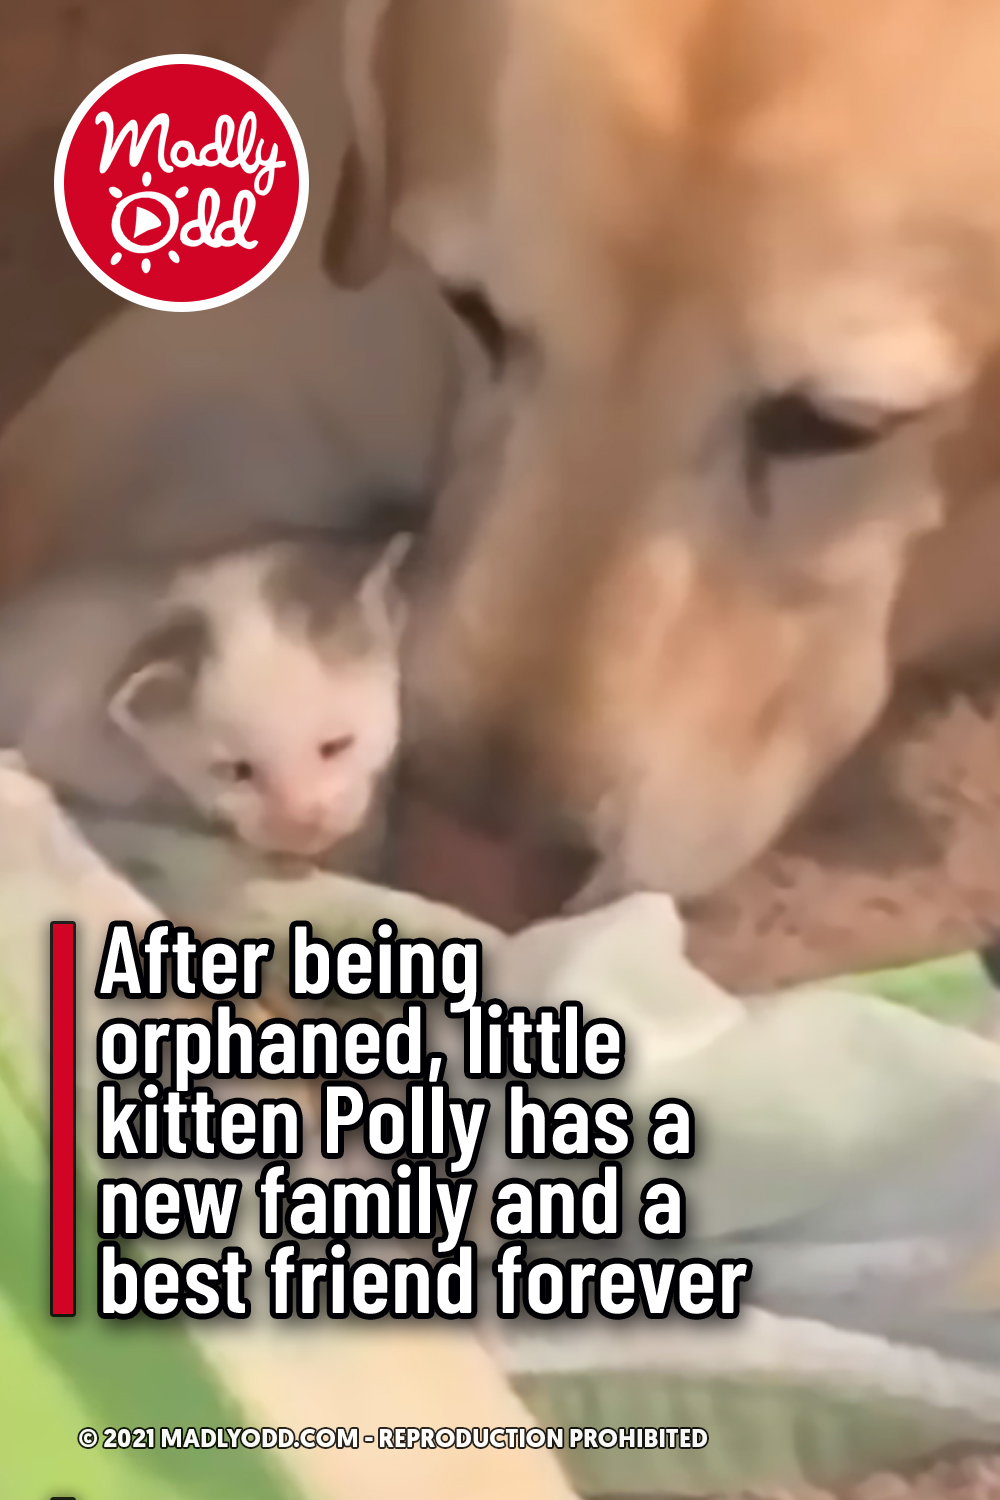 After being orphaned, little kitten Polly has a new family and a best friend forever